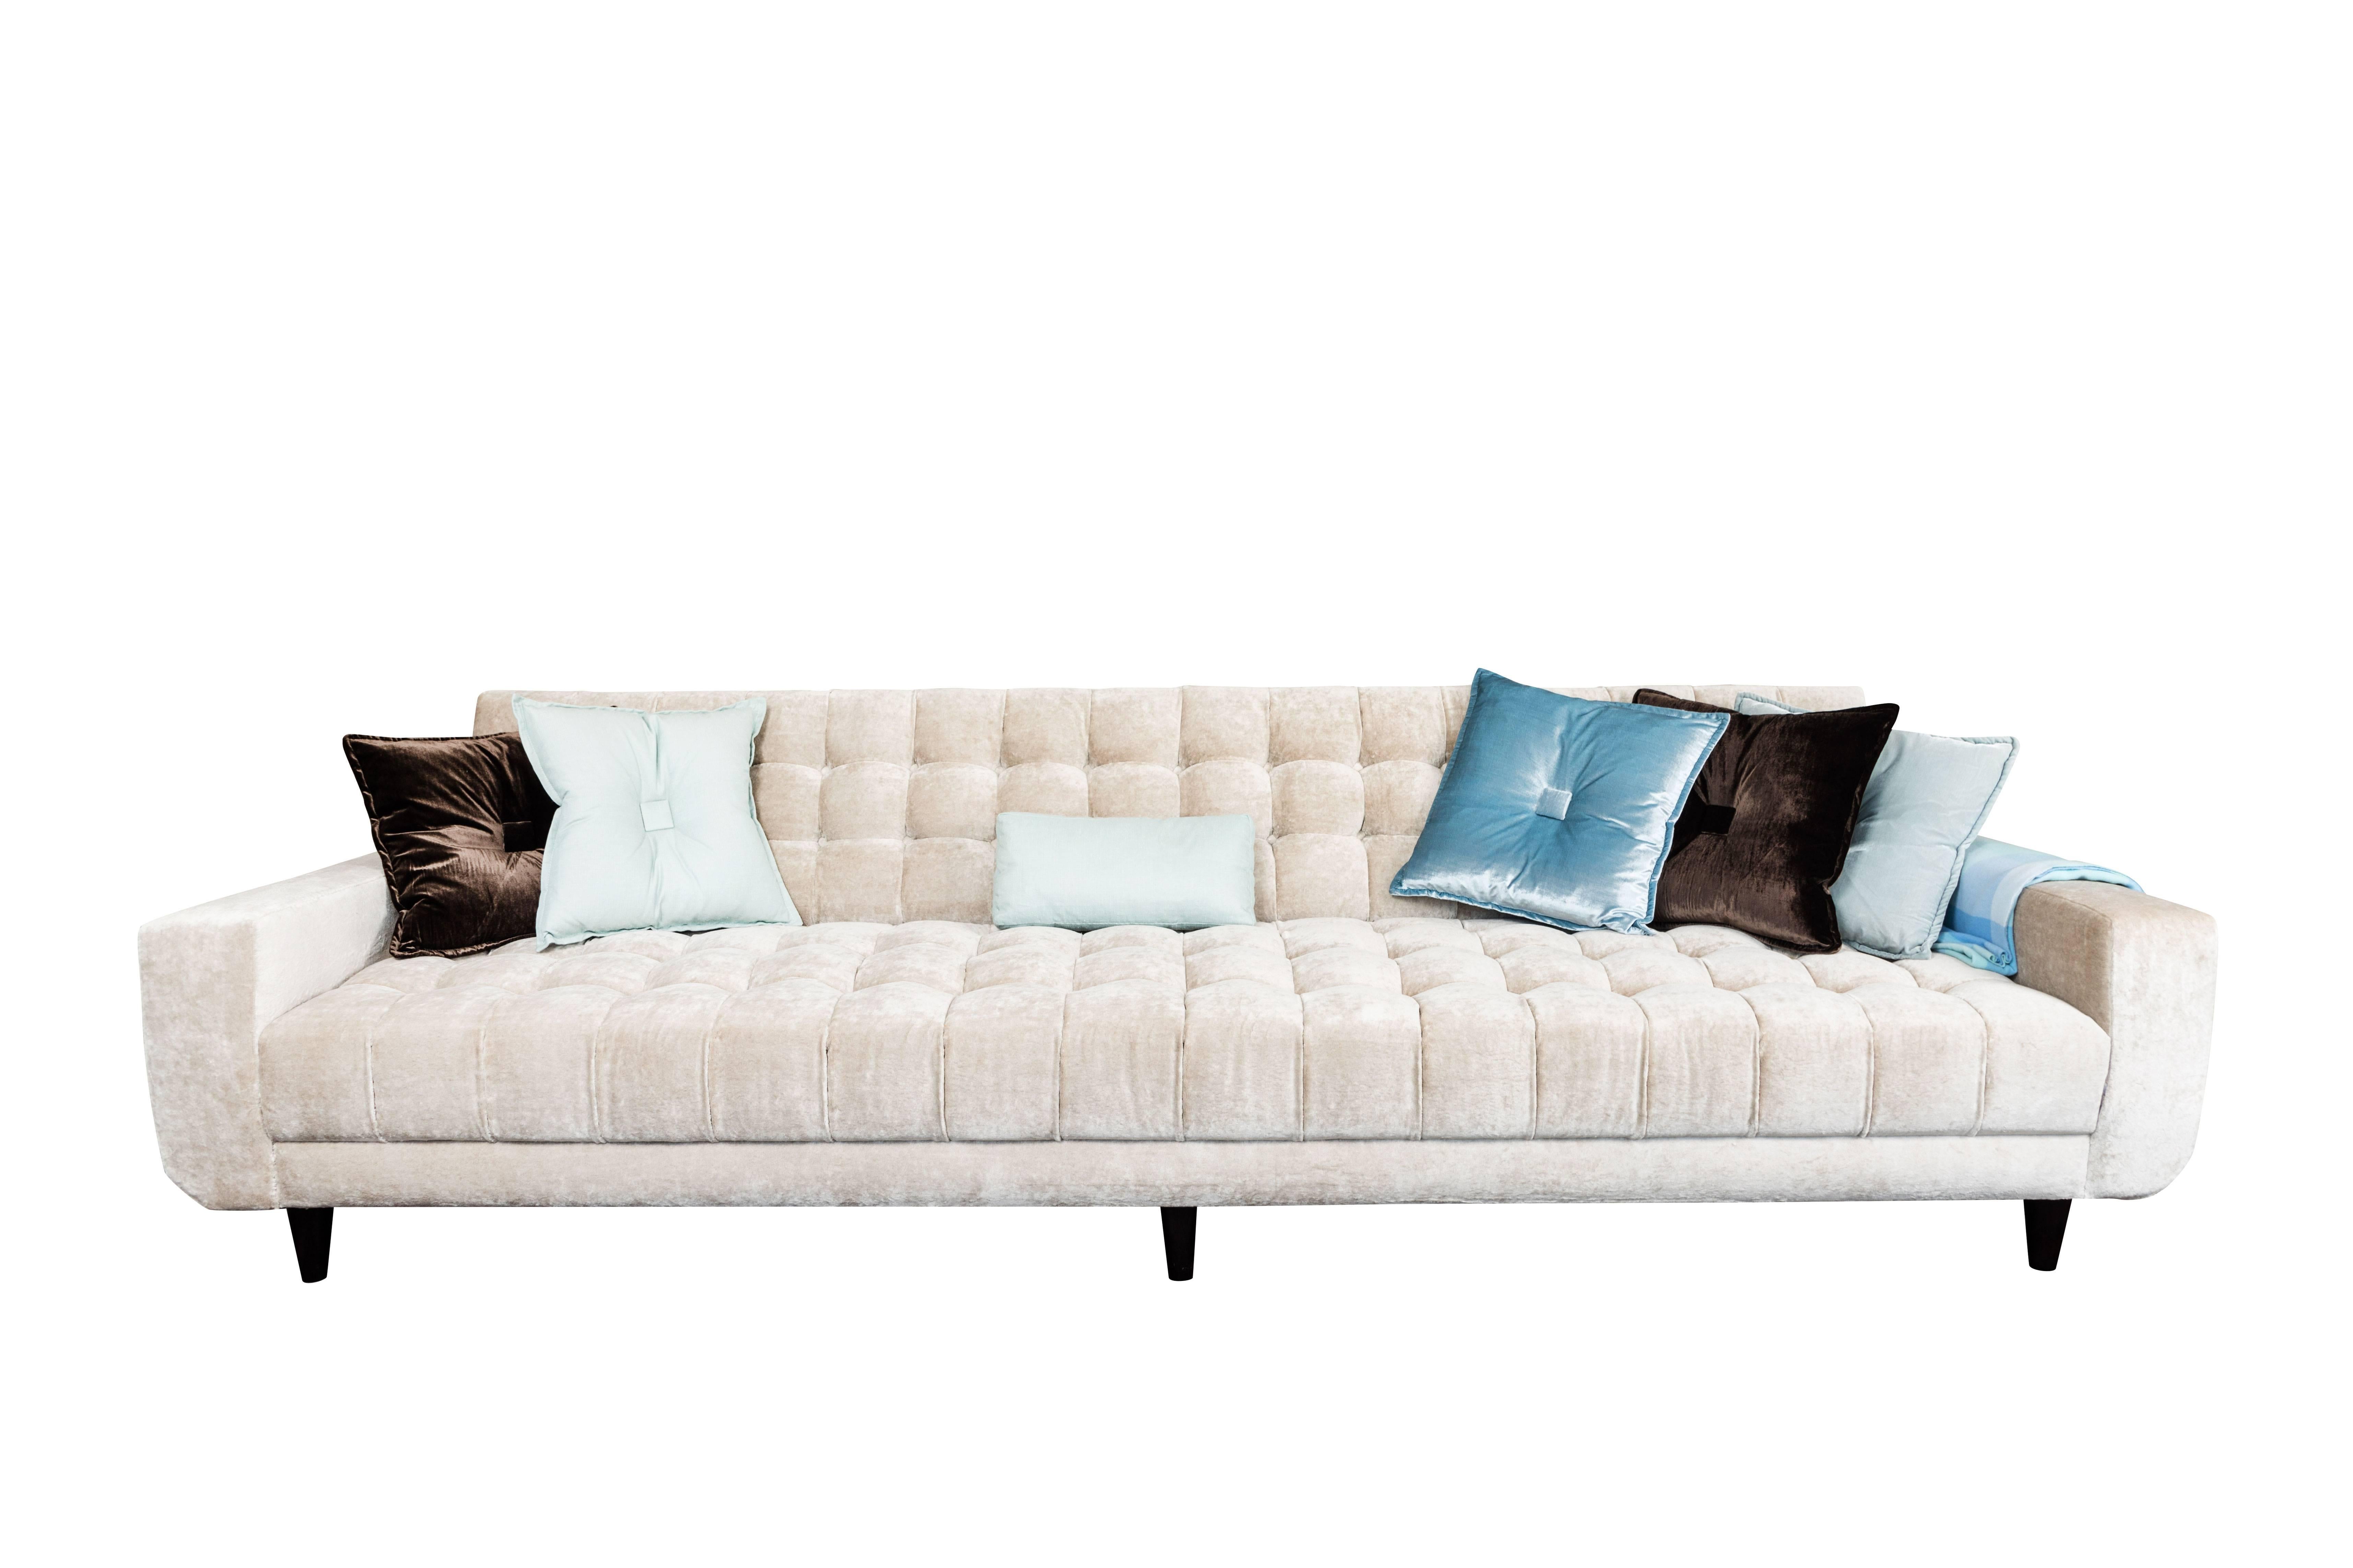 A classic example of the work of William Haines this sofa is extra long. All the important Haines details are present, the deep biscuit tufts, the ledge back, the radius front corners, and the simple conical feet. Built for with a seat depth of 24